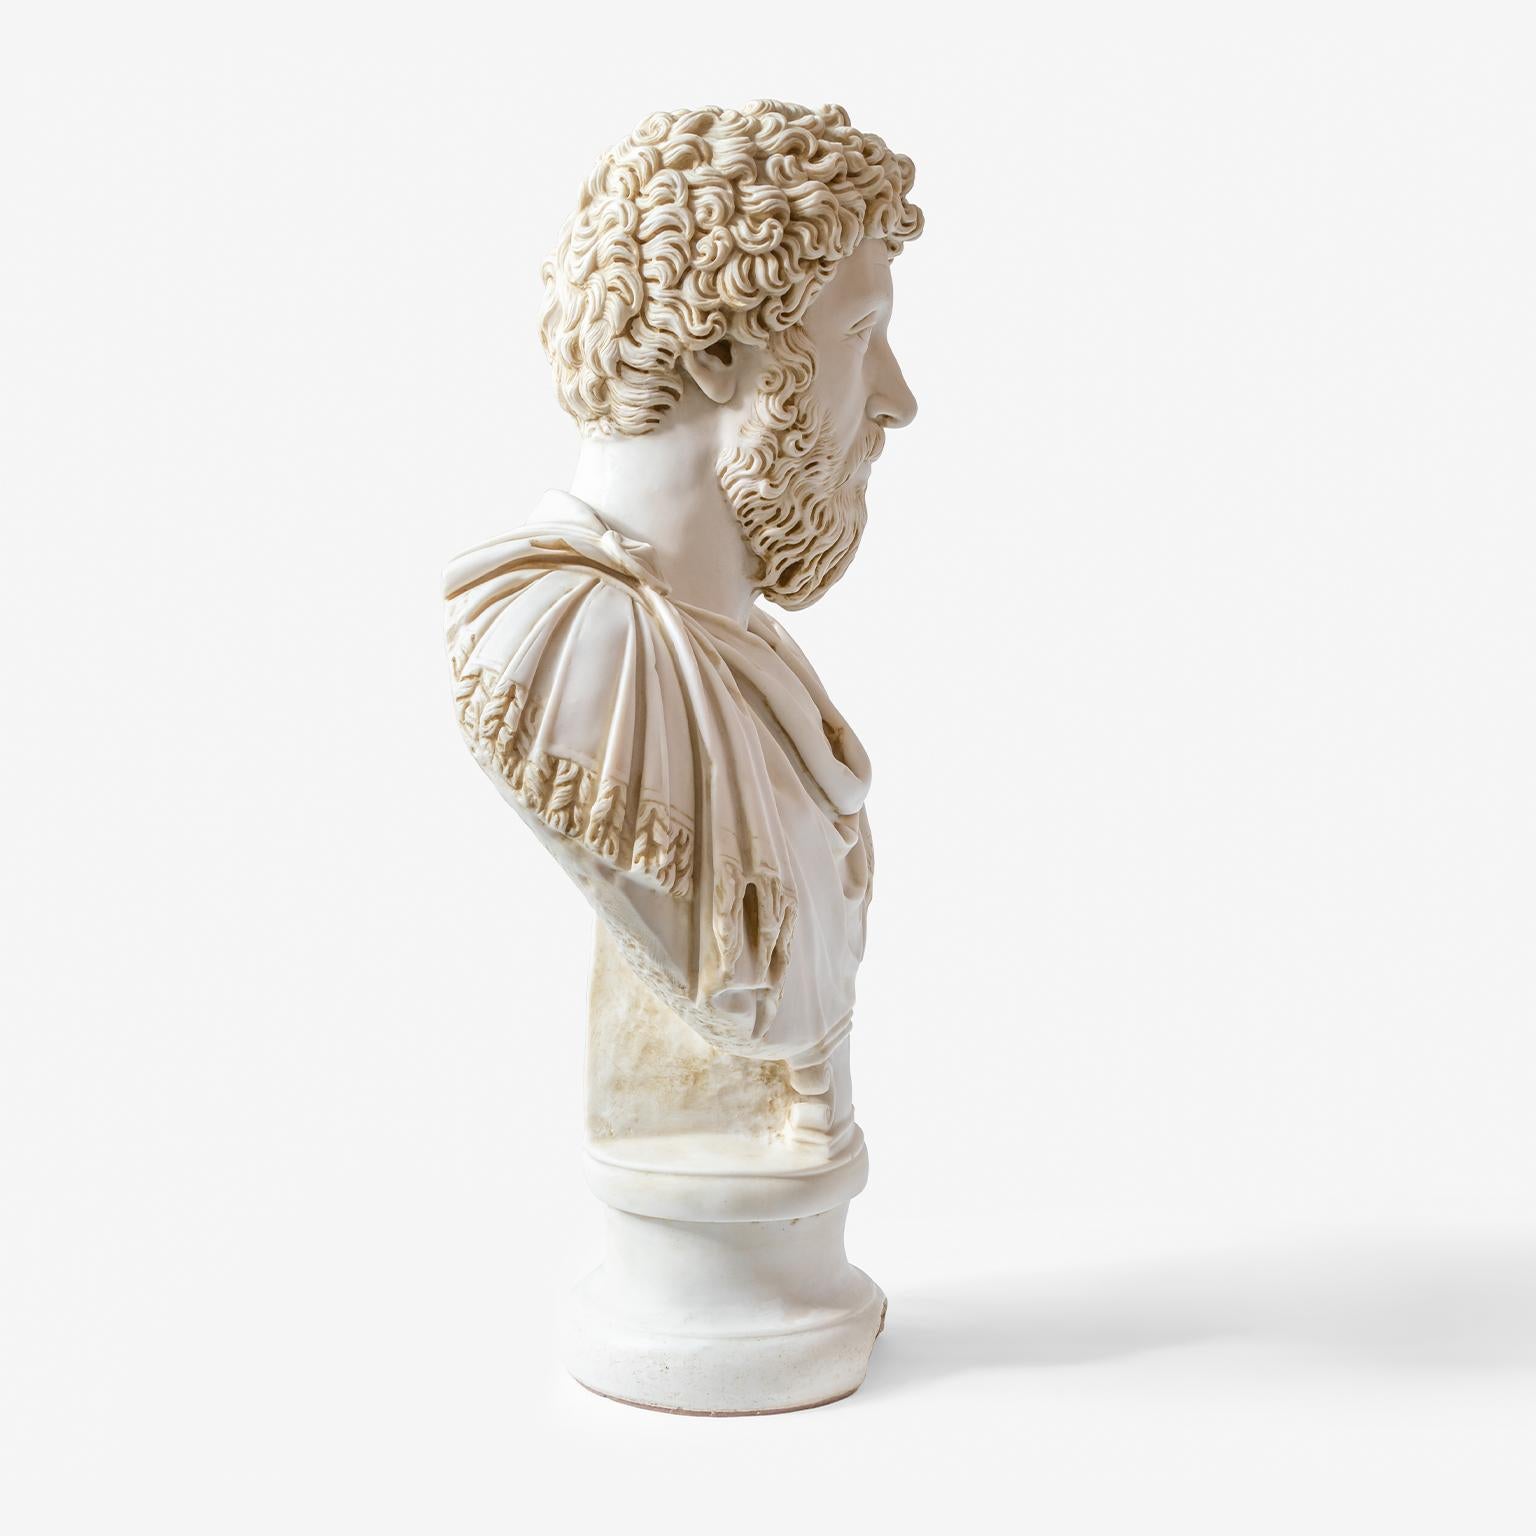 Turkish Marcus Bust Statue Made with Compressed Marble Powder 'Ephesus Museum'